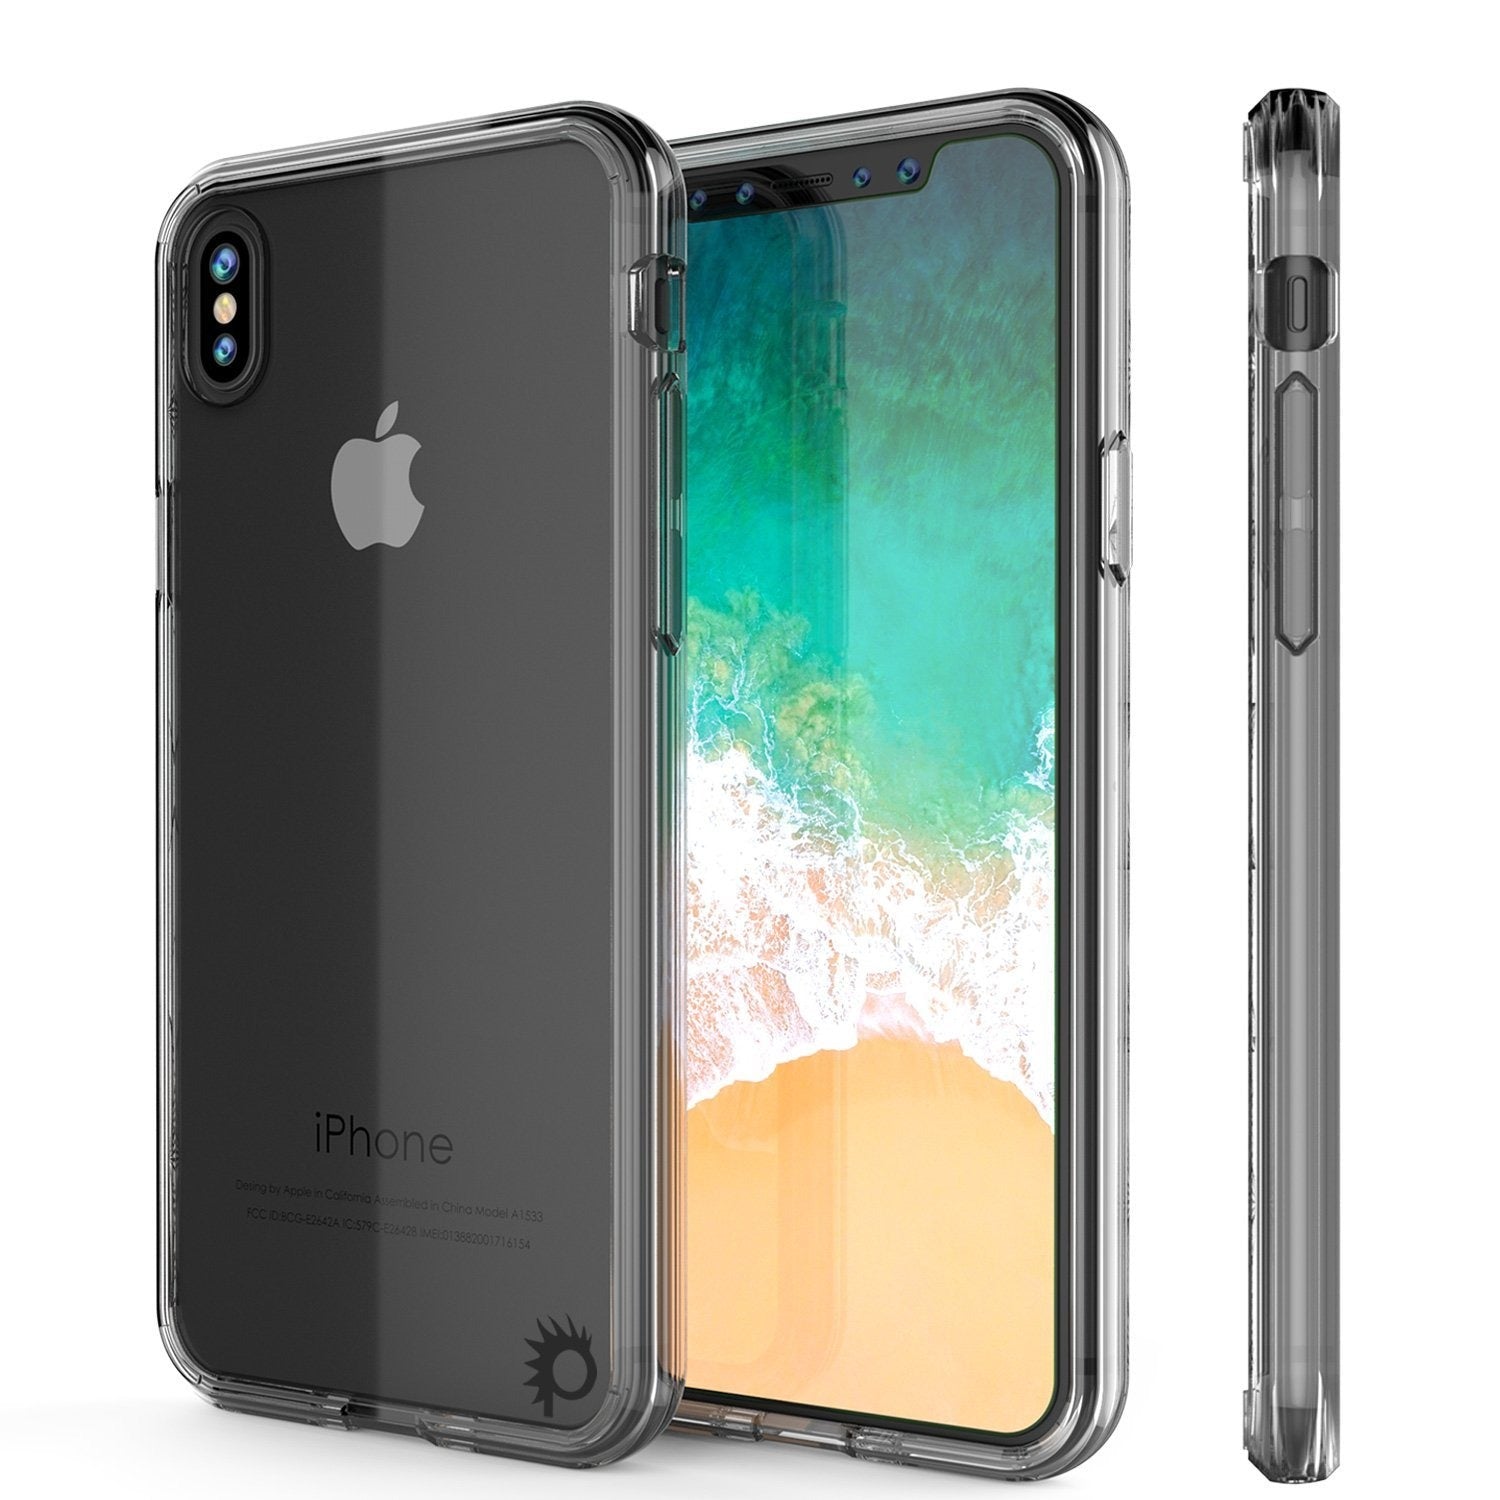 iPhone X Case, PUNKcase [LUCID 2.0 Series] [Slim Fit] Armor Cover W/Integrated Anti-Shock System [Clear]